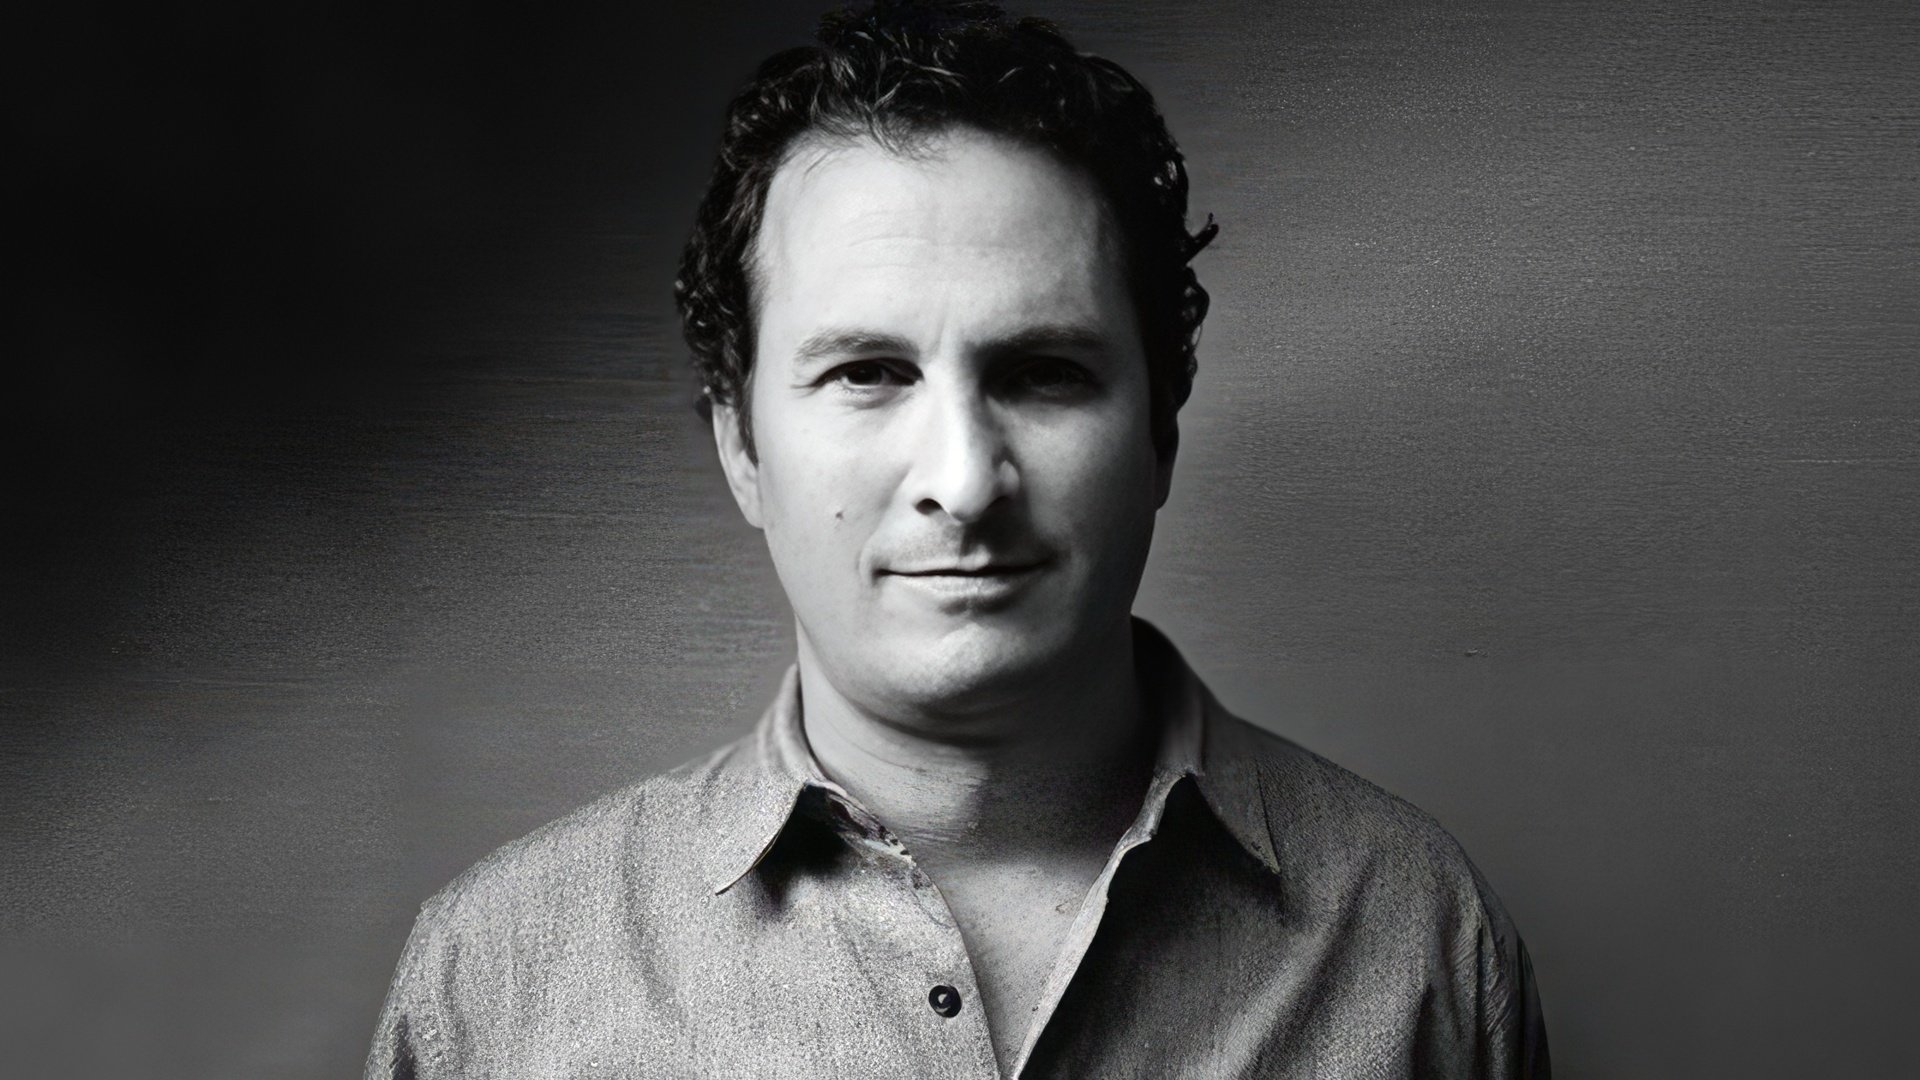 Darren Aronofsky became a student of Harvard University social anthropology department in 1987